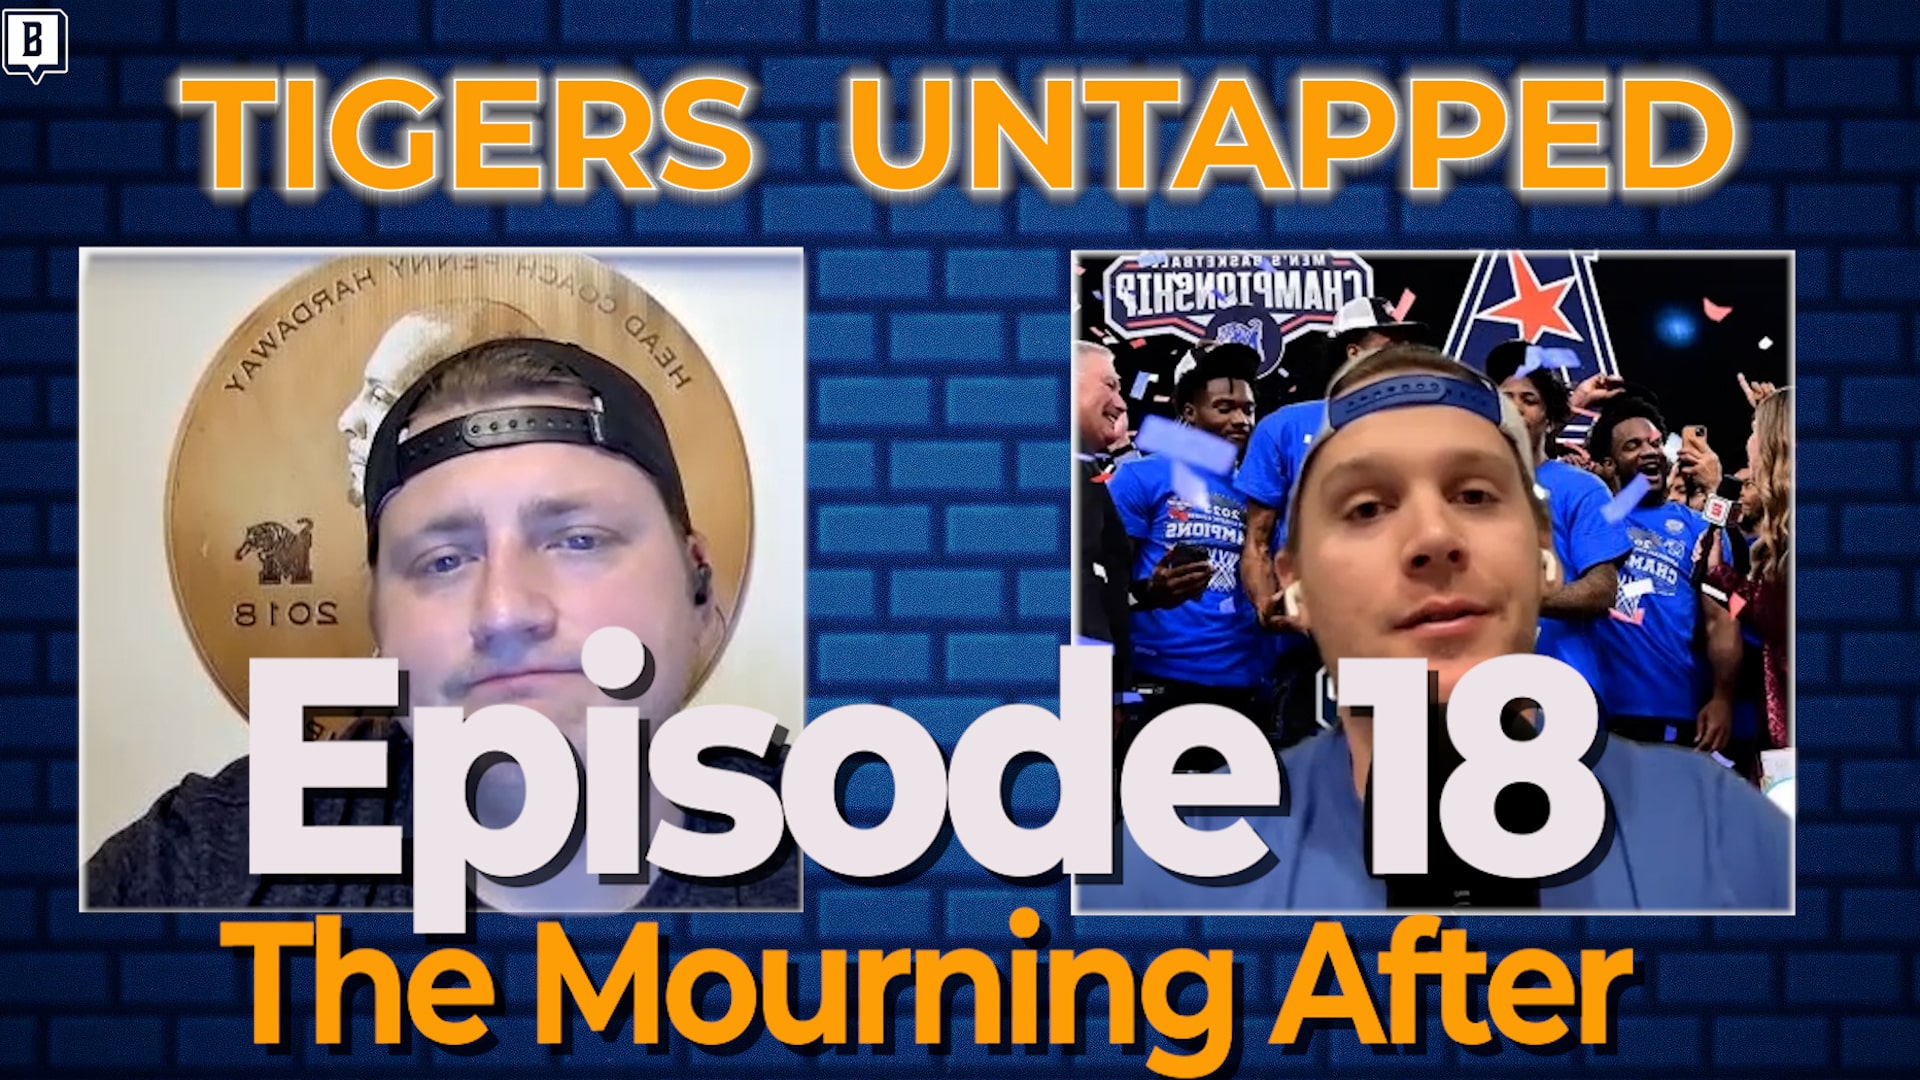 Featured image for “Tigers Untapped Ep 18: The Mourning After”